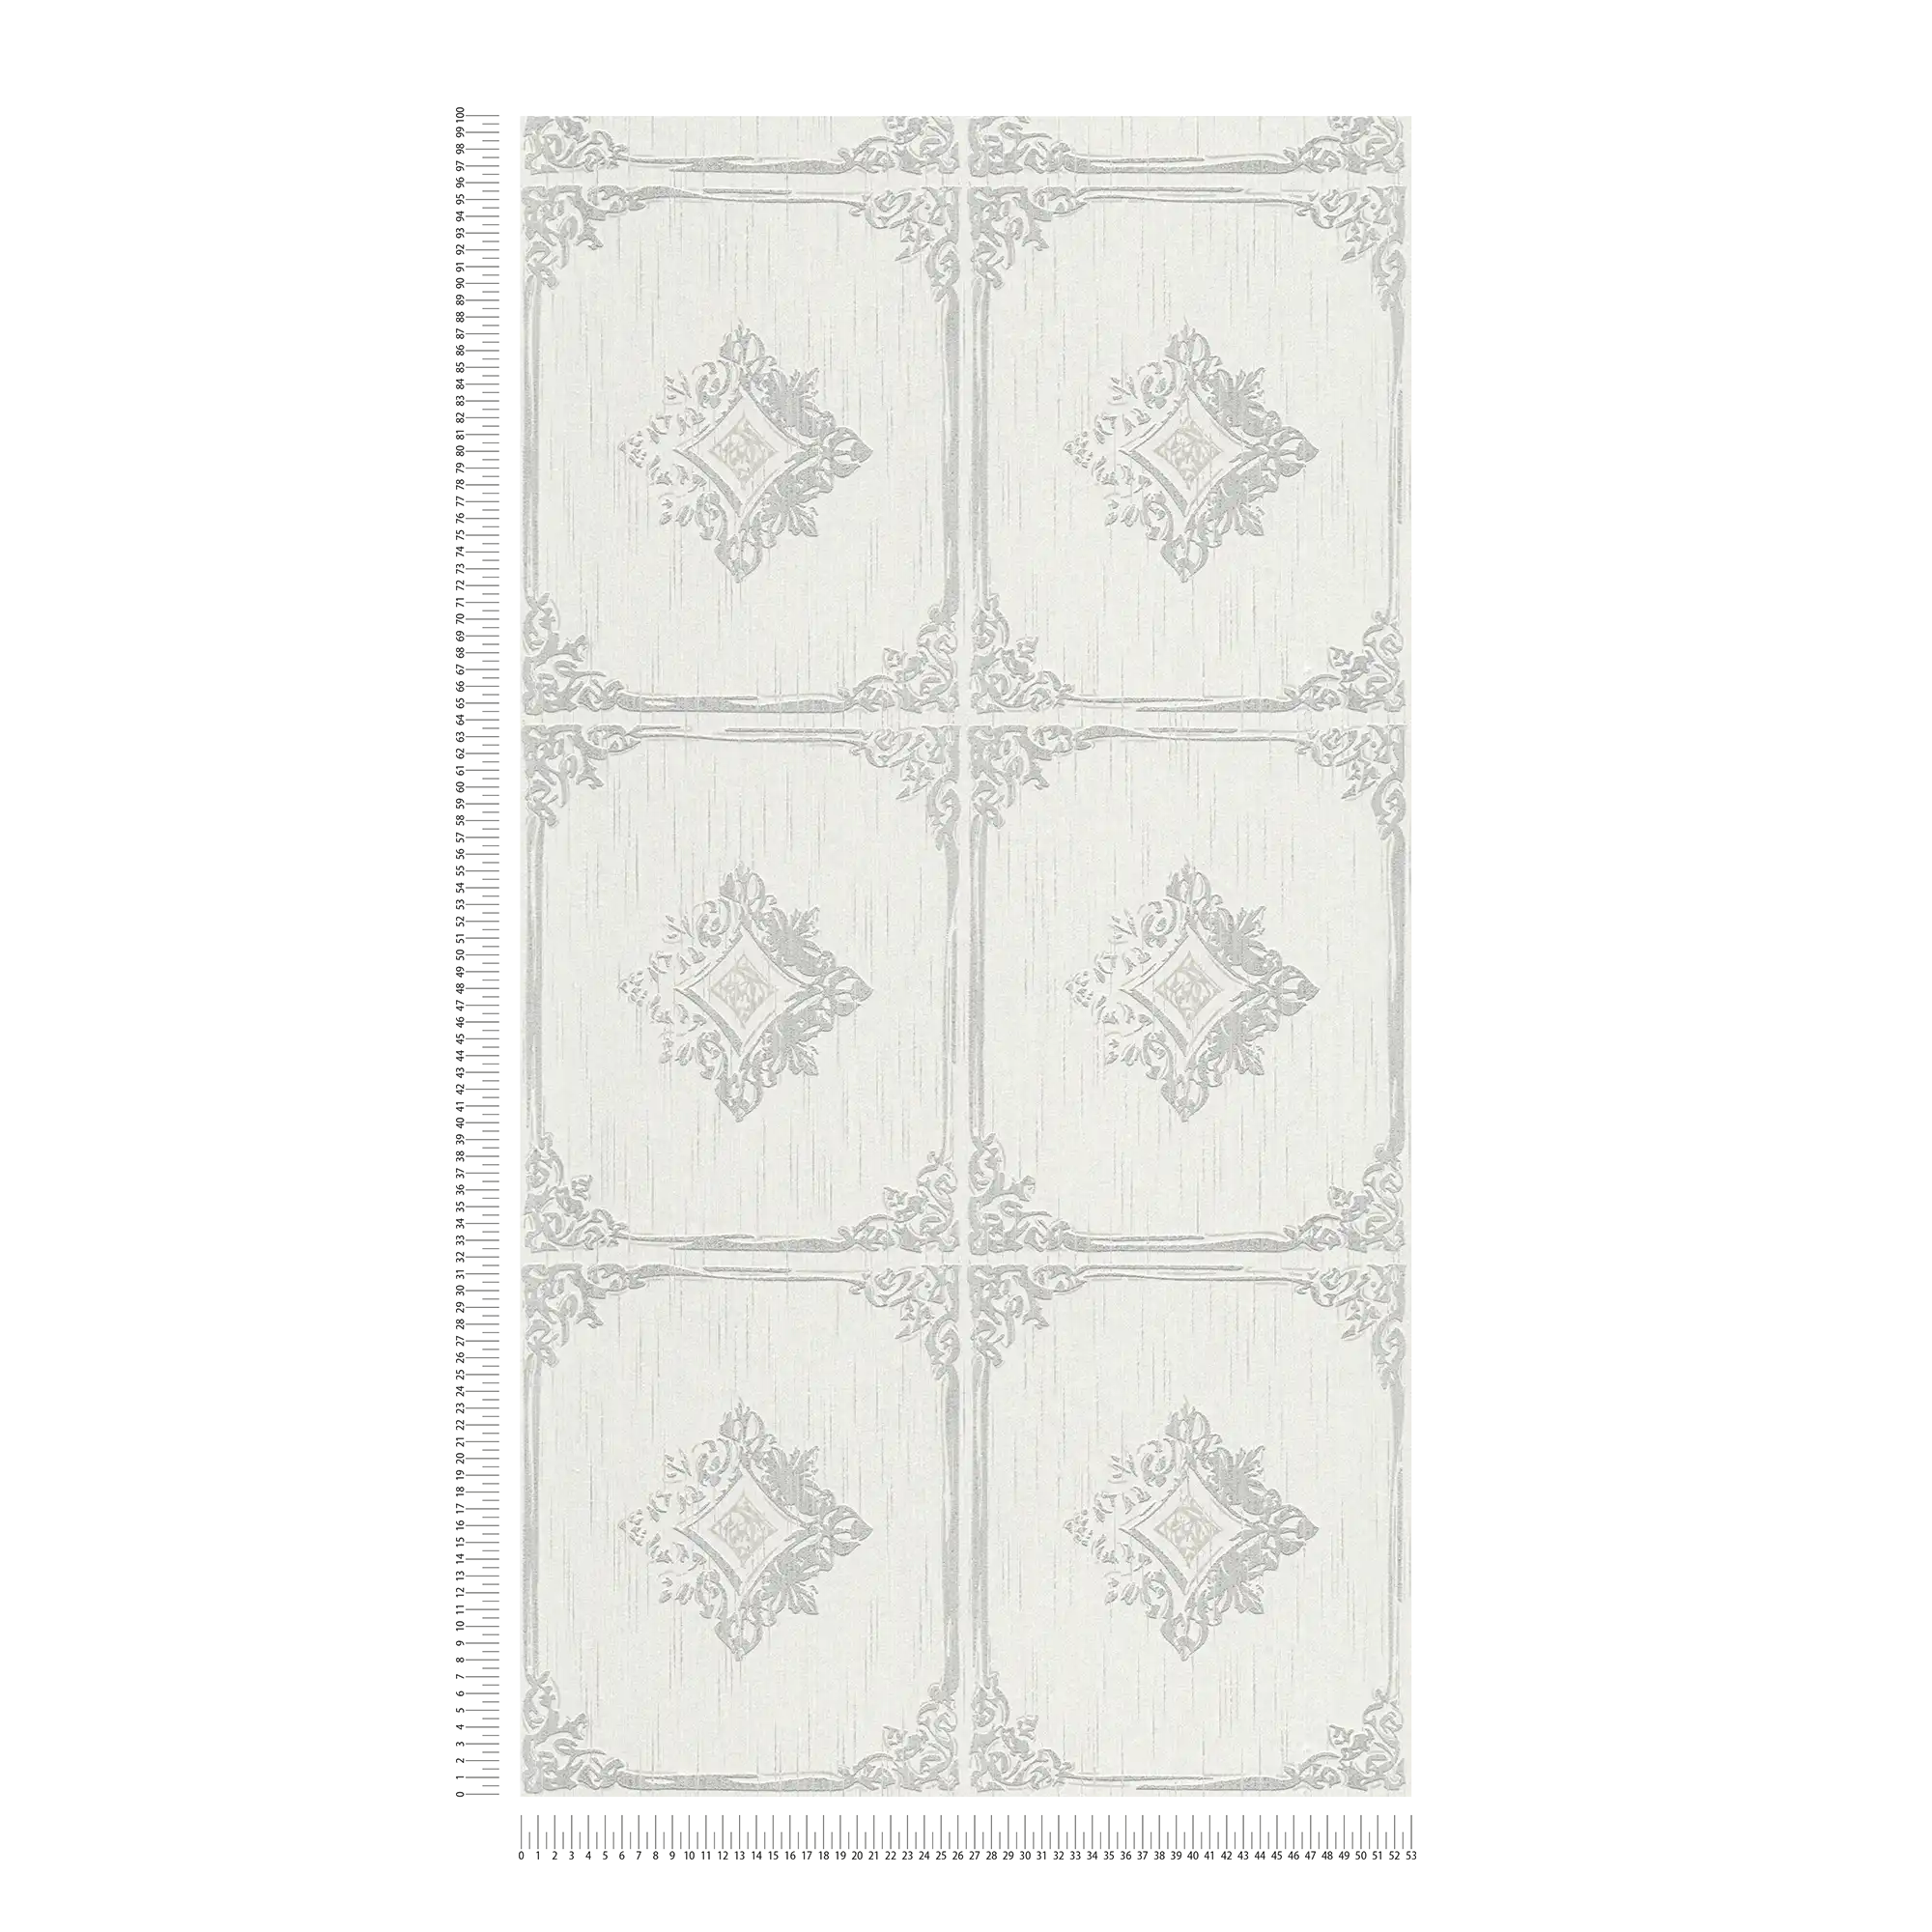             Wallpaper vintage stucco design with ornament coffers - grey, white
        